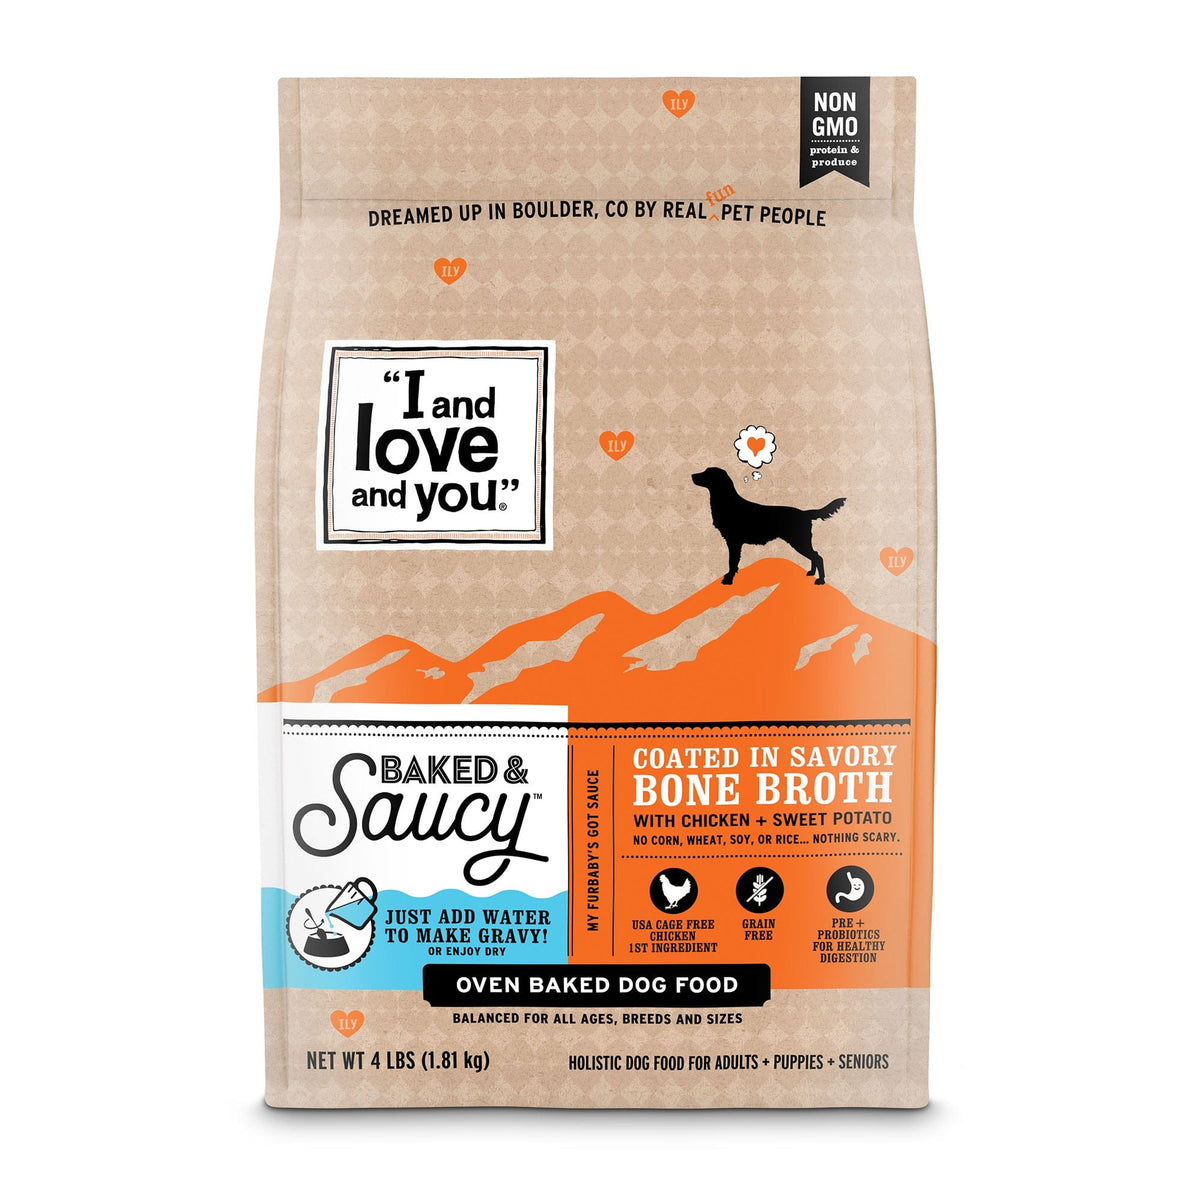 Baked & Saucy - Chicken + Sweet Potato. Heart-shaped kibble coated in savory bone broth with chicken and sweet potato, a bag of dog food with a silhouette of a dog.